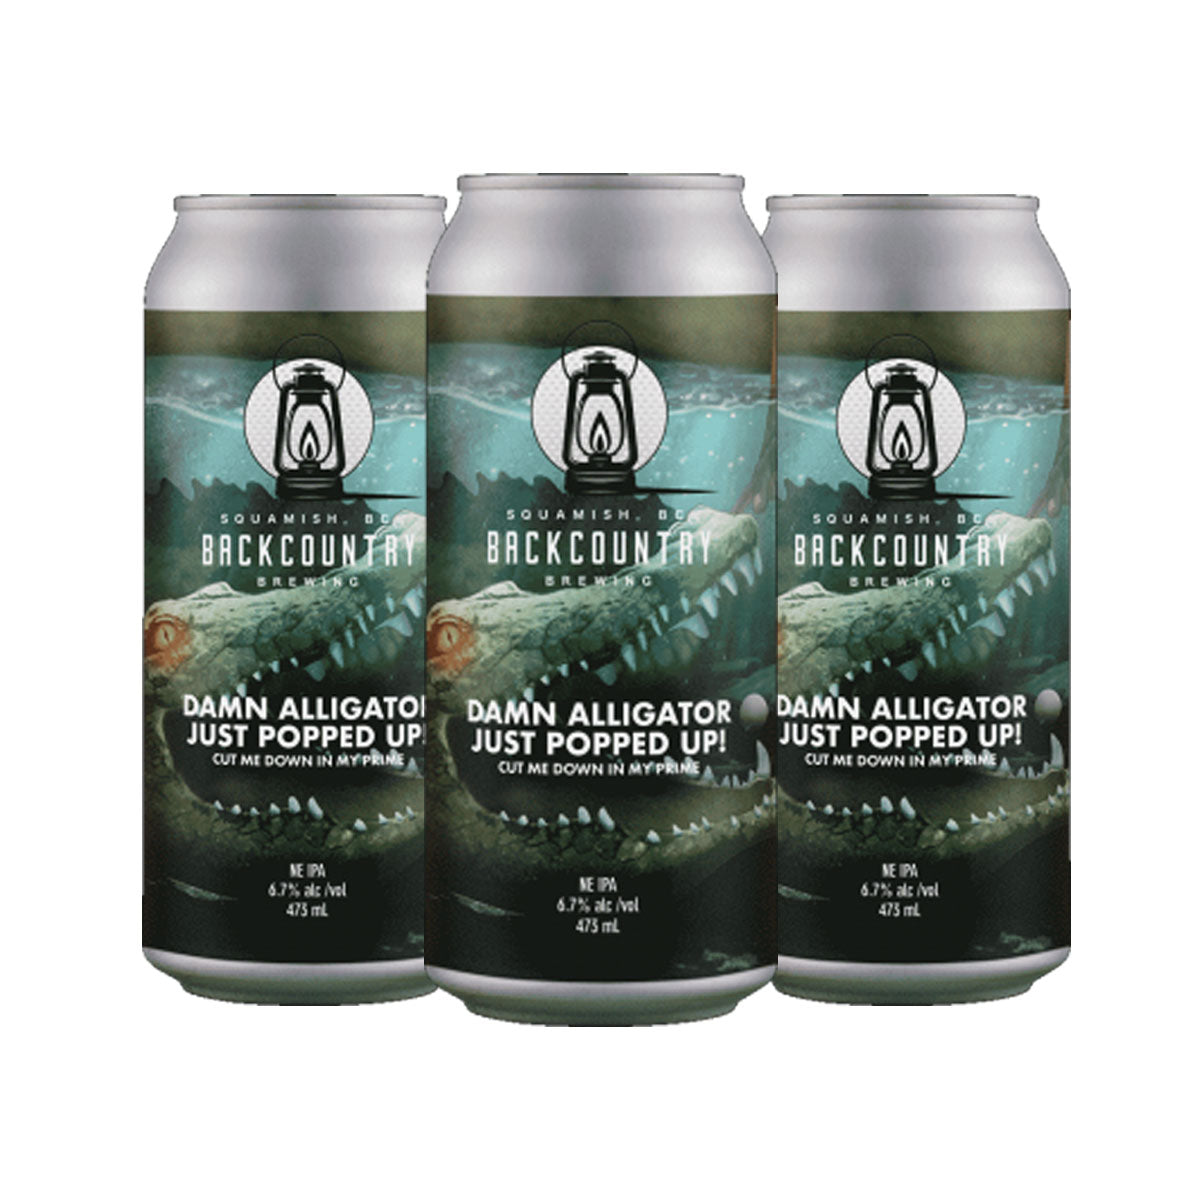 TAG Liquor Stores BC - Backcountry Brewing "Damn Alligator Just Showed Up! Cut Me Down In My Prime" NE IPA 4 Pack Cans